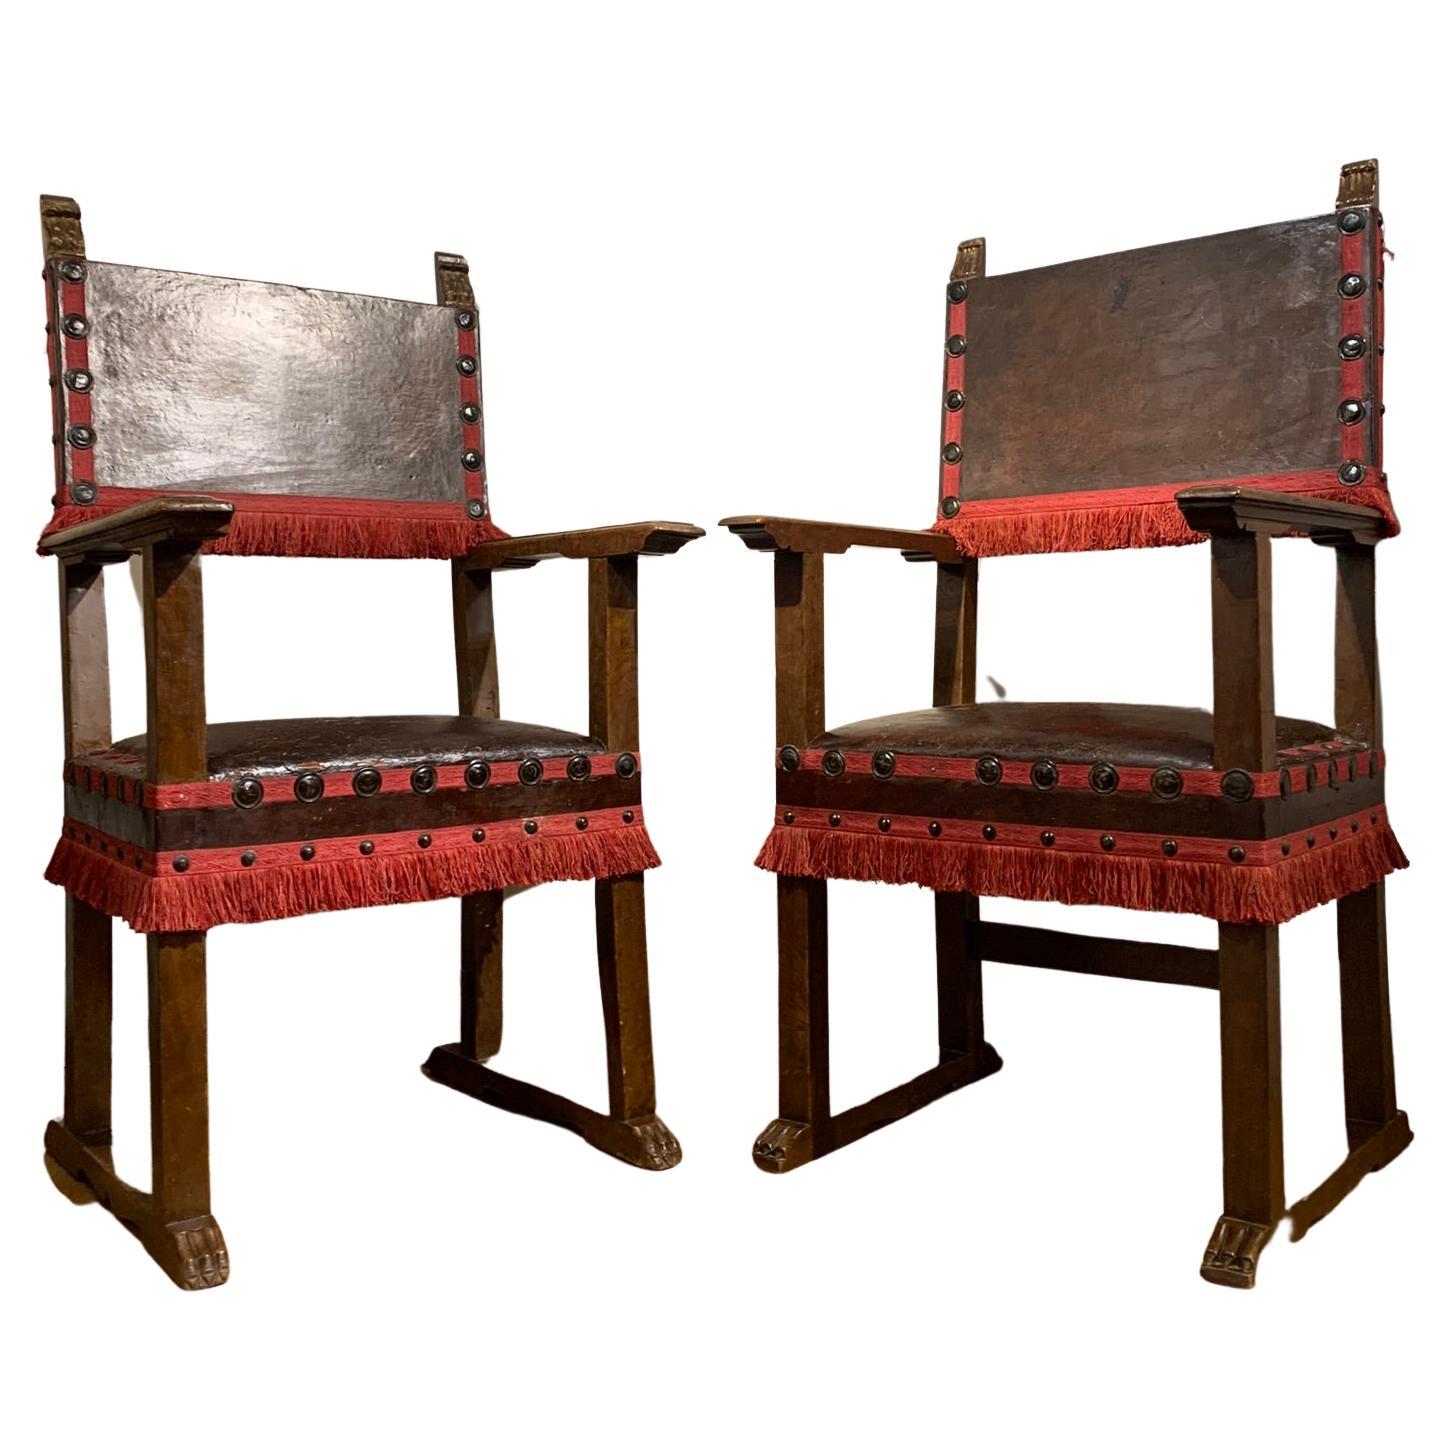 Late 16th Century, Couple Af Walnut Thrones